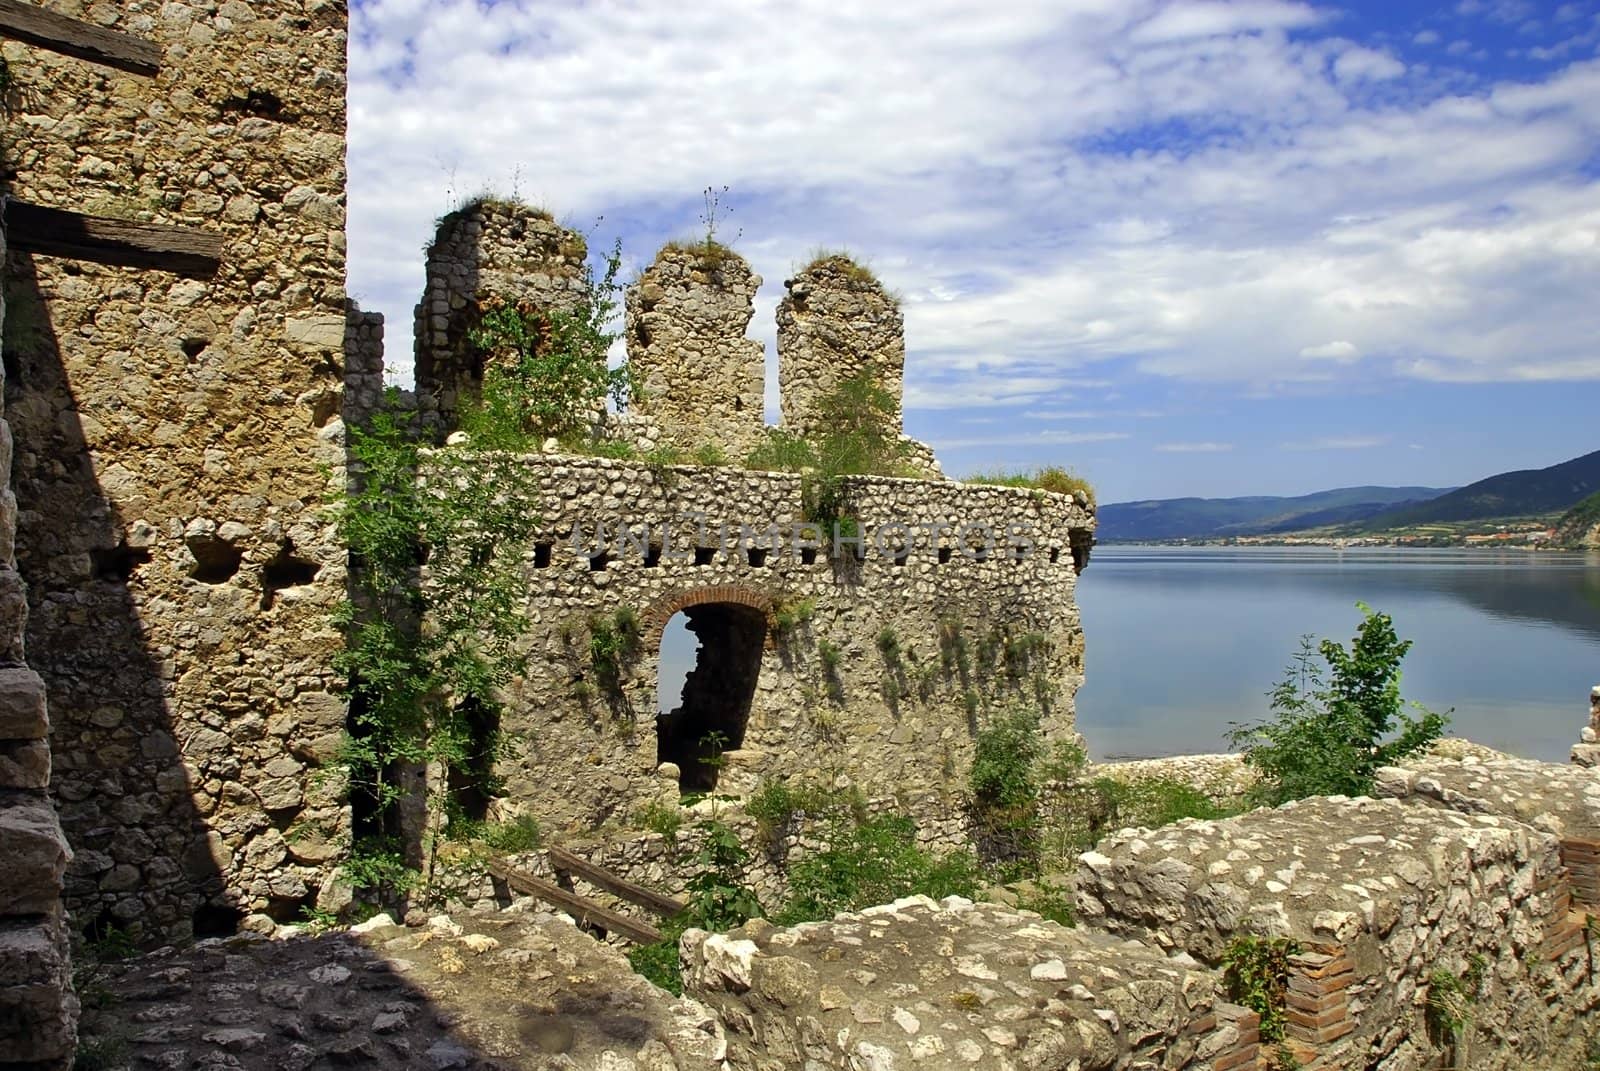 Details of Golubac fortress in Serbia by simply